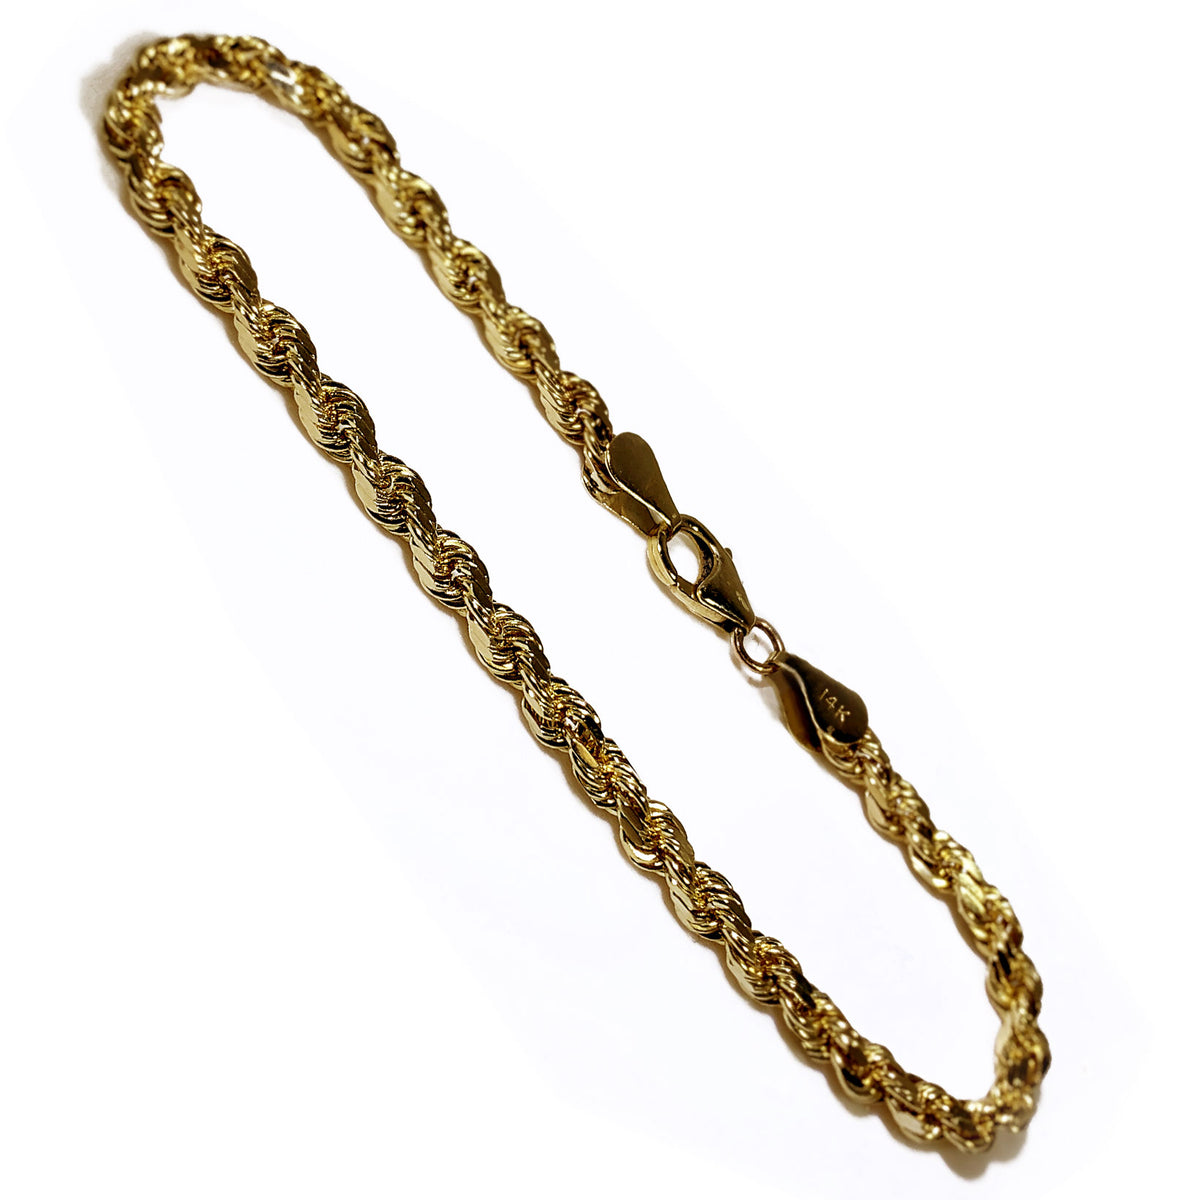 10K Yellow Gold Men’s Fancy Rope Style Bracelet 8″ Inches